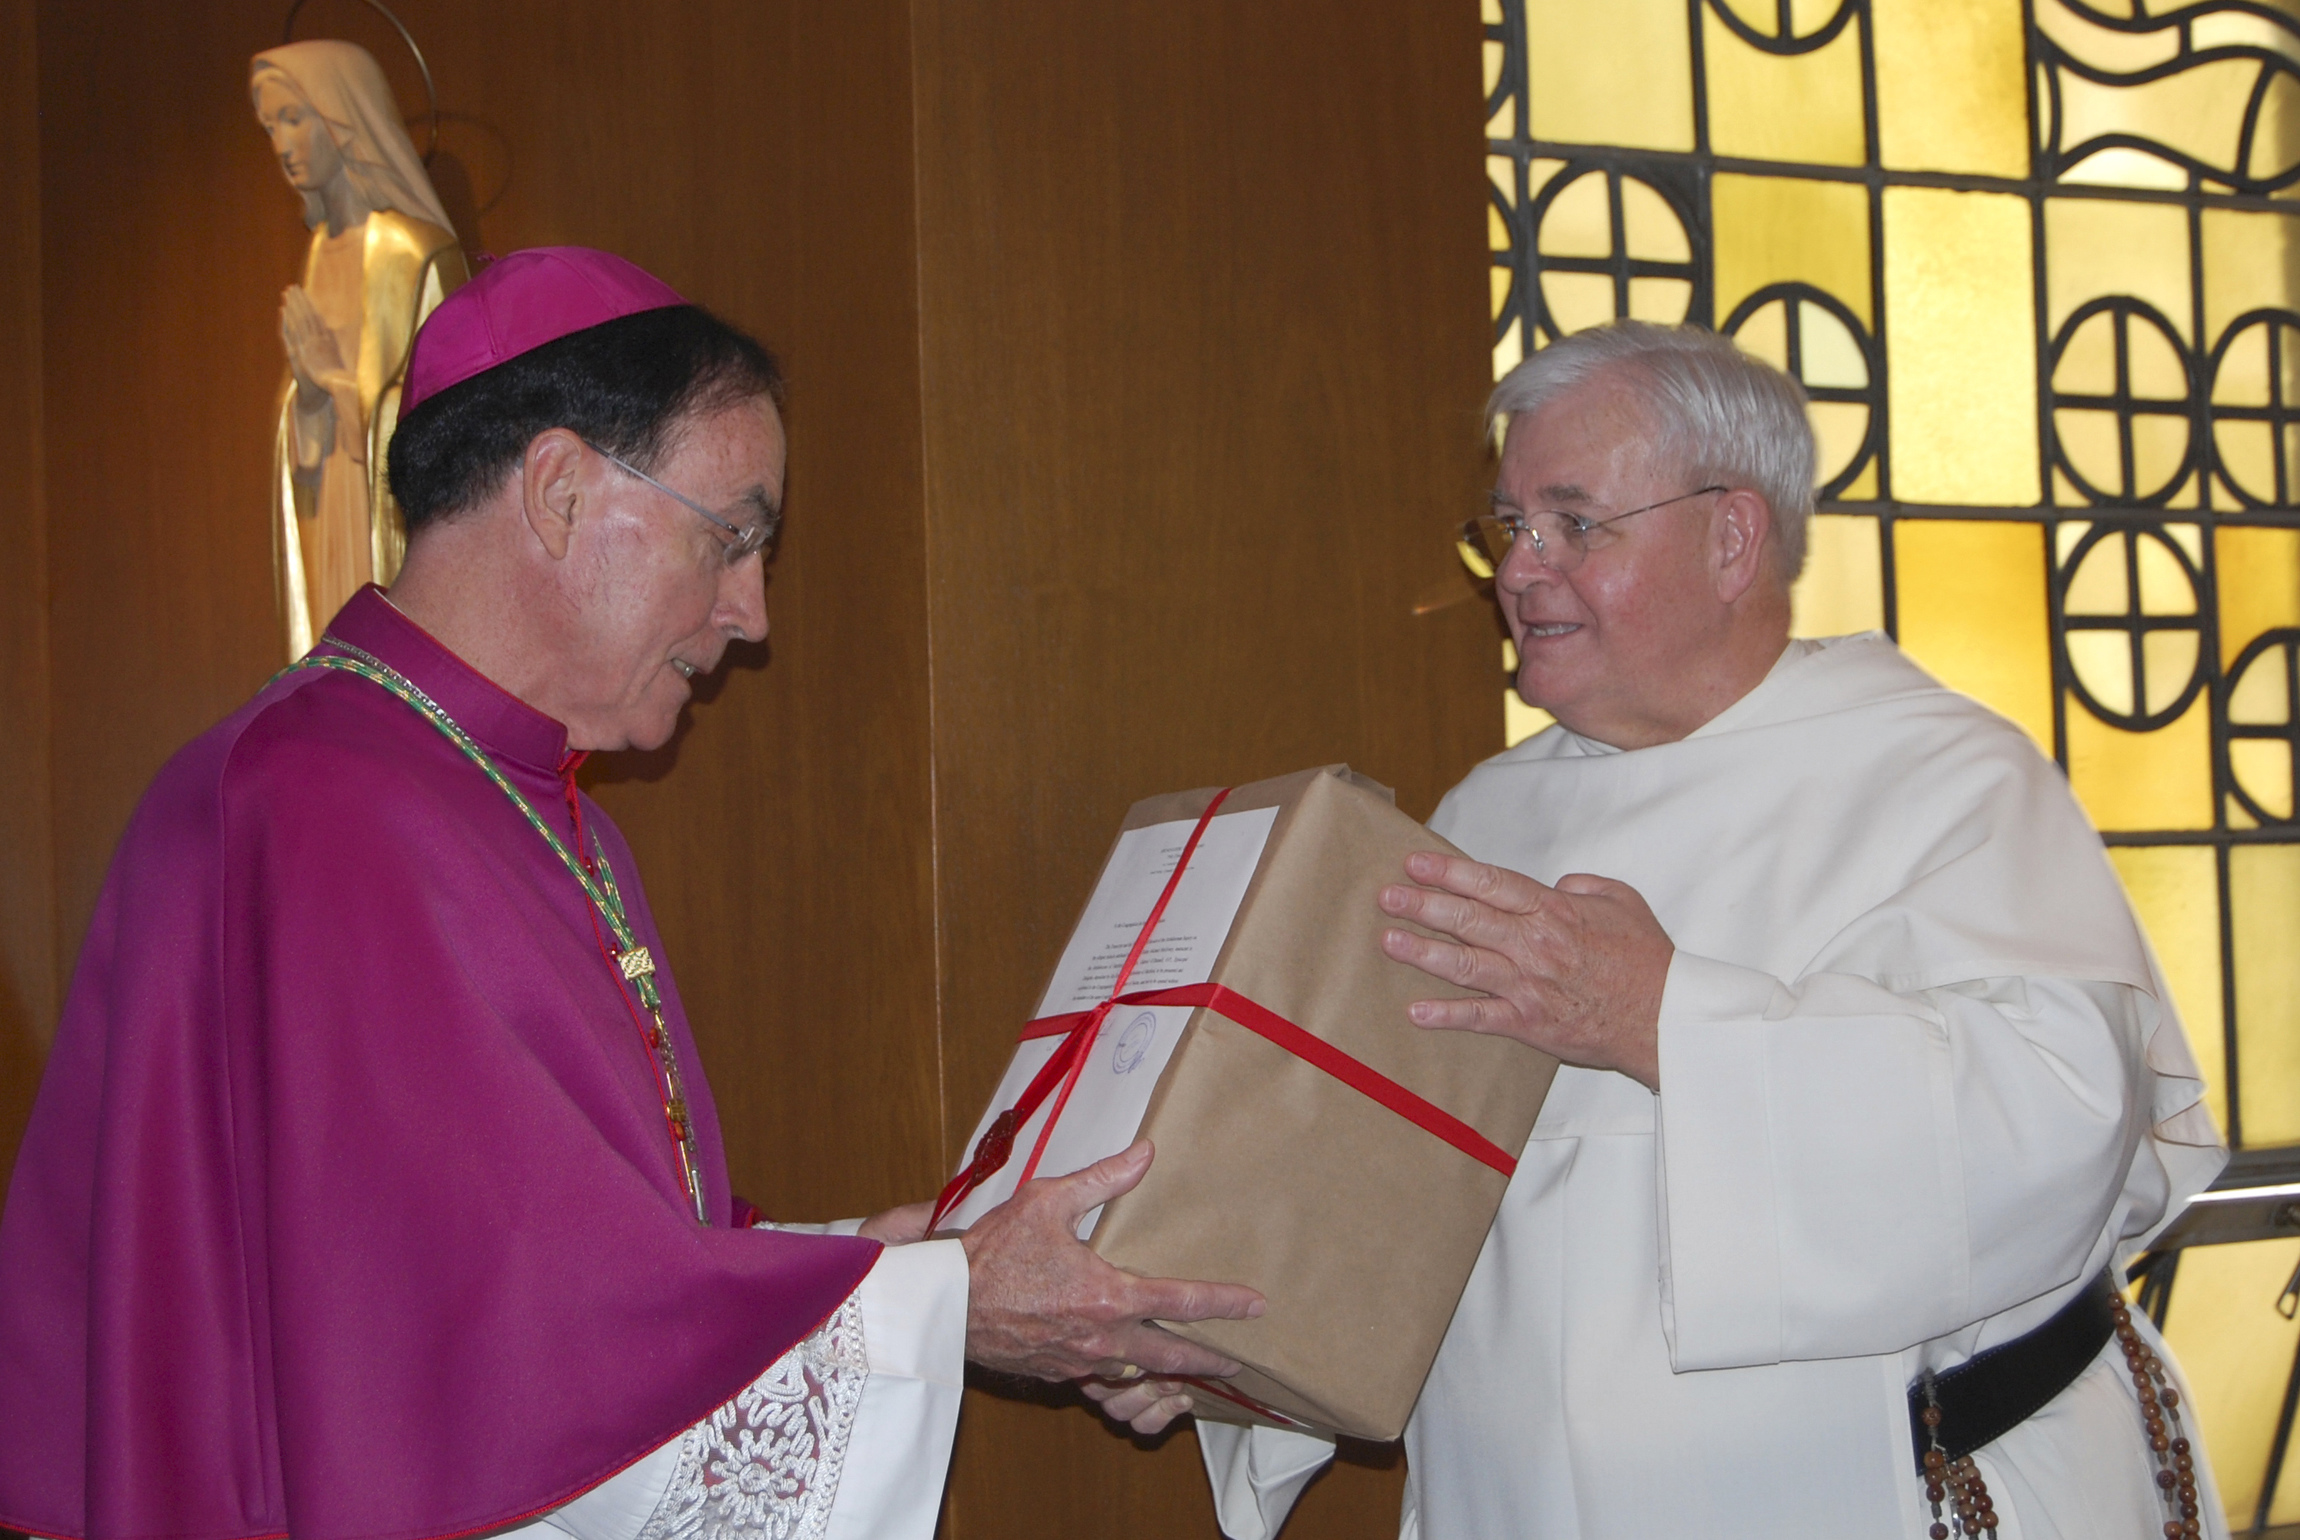 Archbishop Henry Mansell of Hartford, Conn., left, receives from Dominican Fr. Gabriel O'Donnell documents containing new evidence of an alleged miracle attributed to the founder of the Knights of Columbus, Fr. Michael McGivney, during a ceremony in 2009. (CNS/Catholic Transcript/Jack Sheedy)